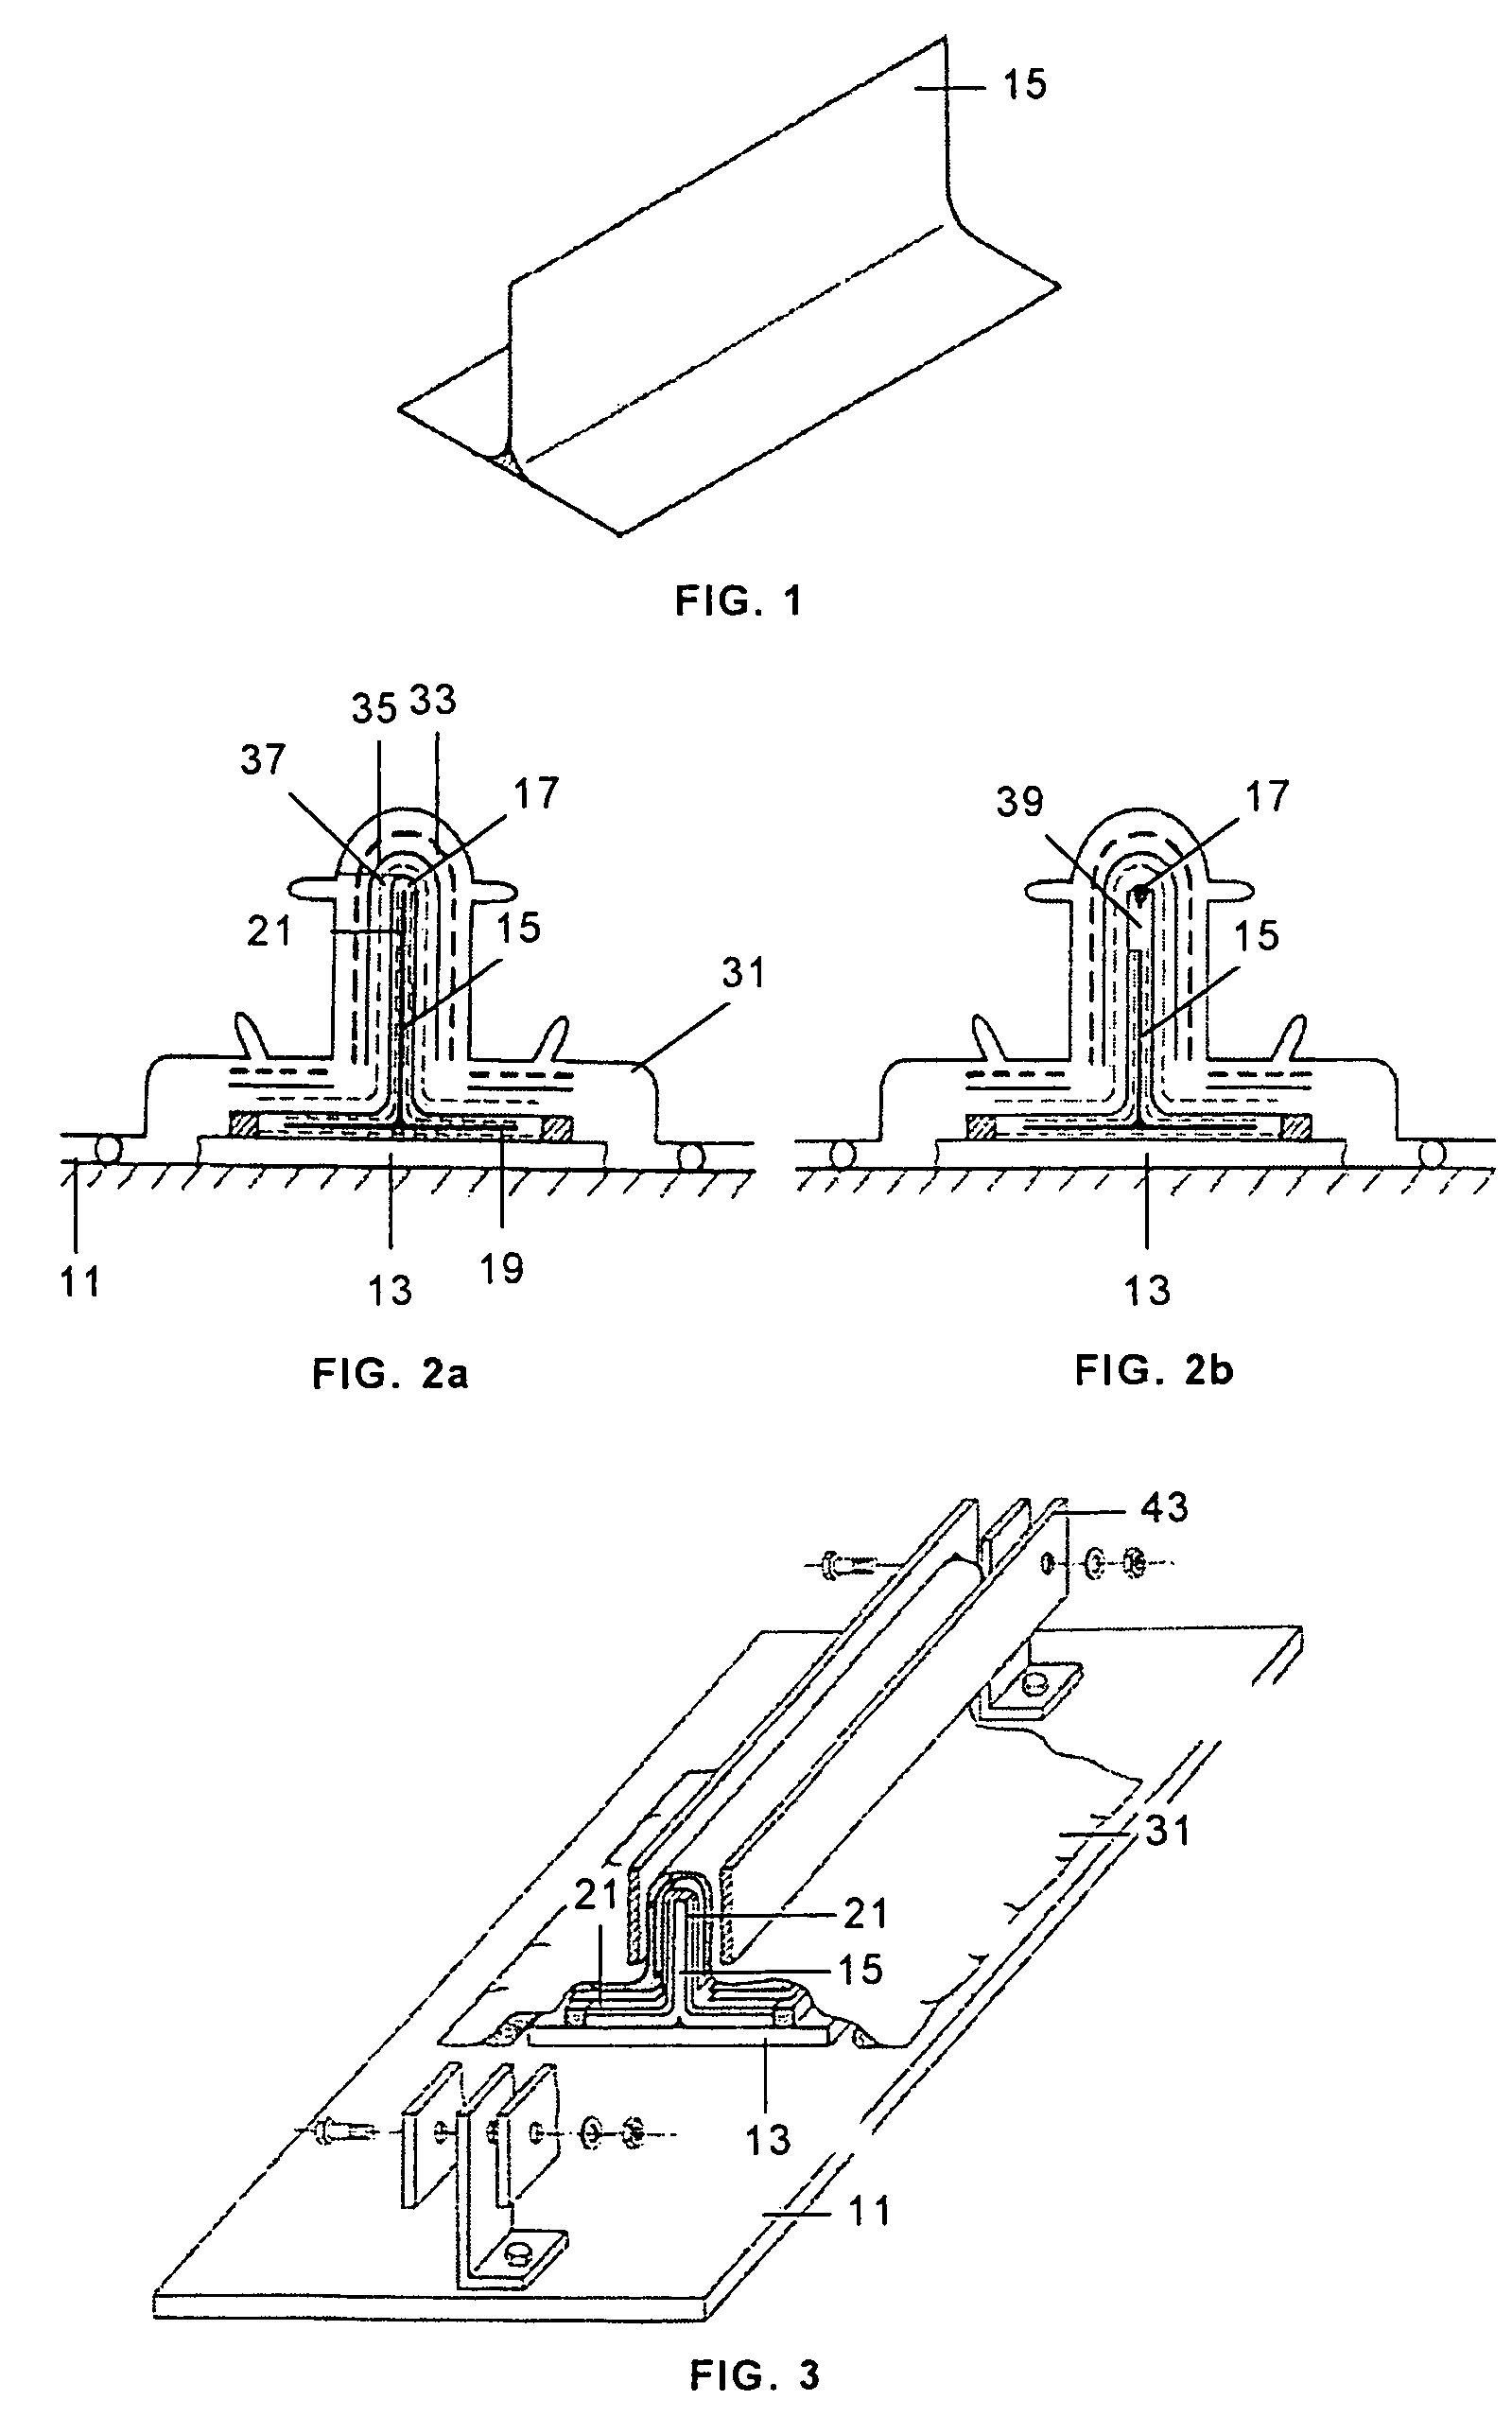 Process of manufacturing composite structures with embedded precured tools